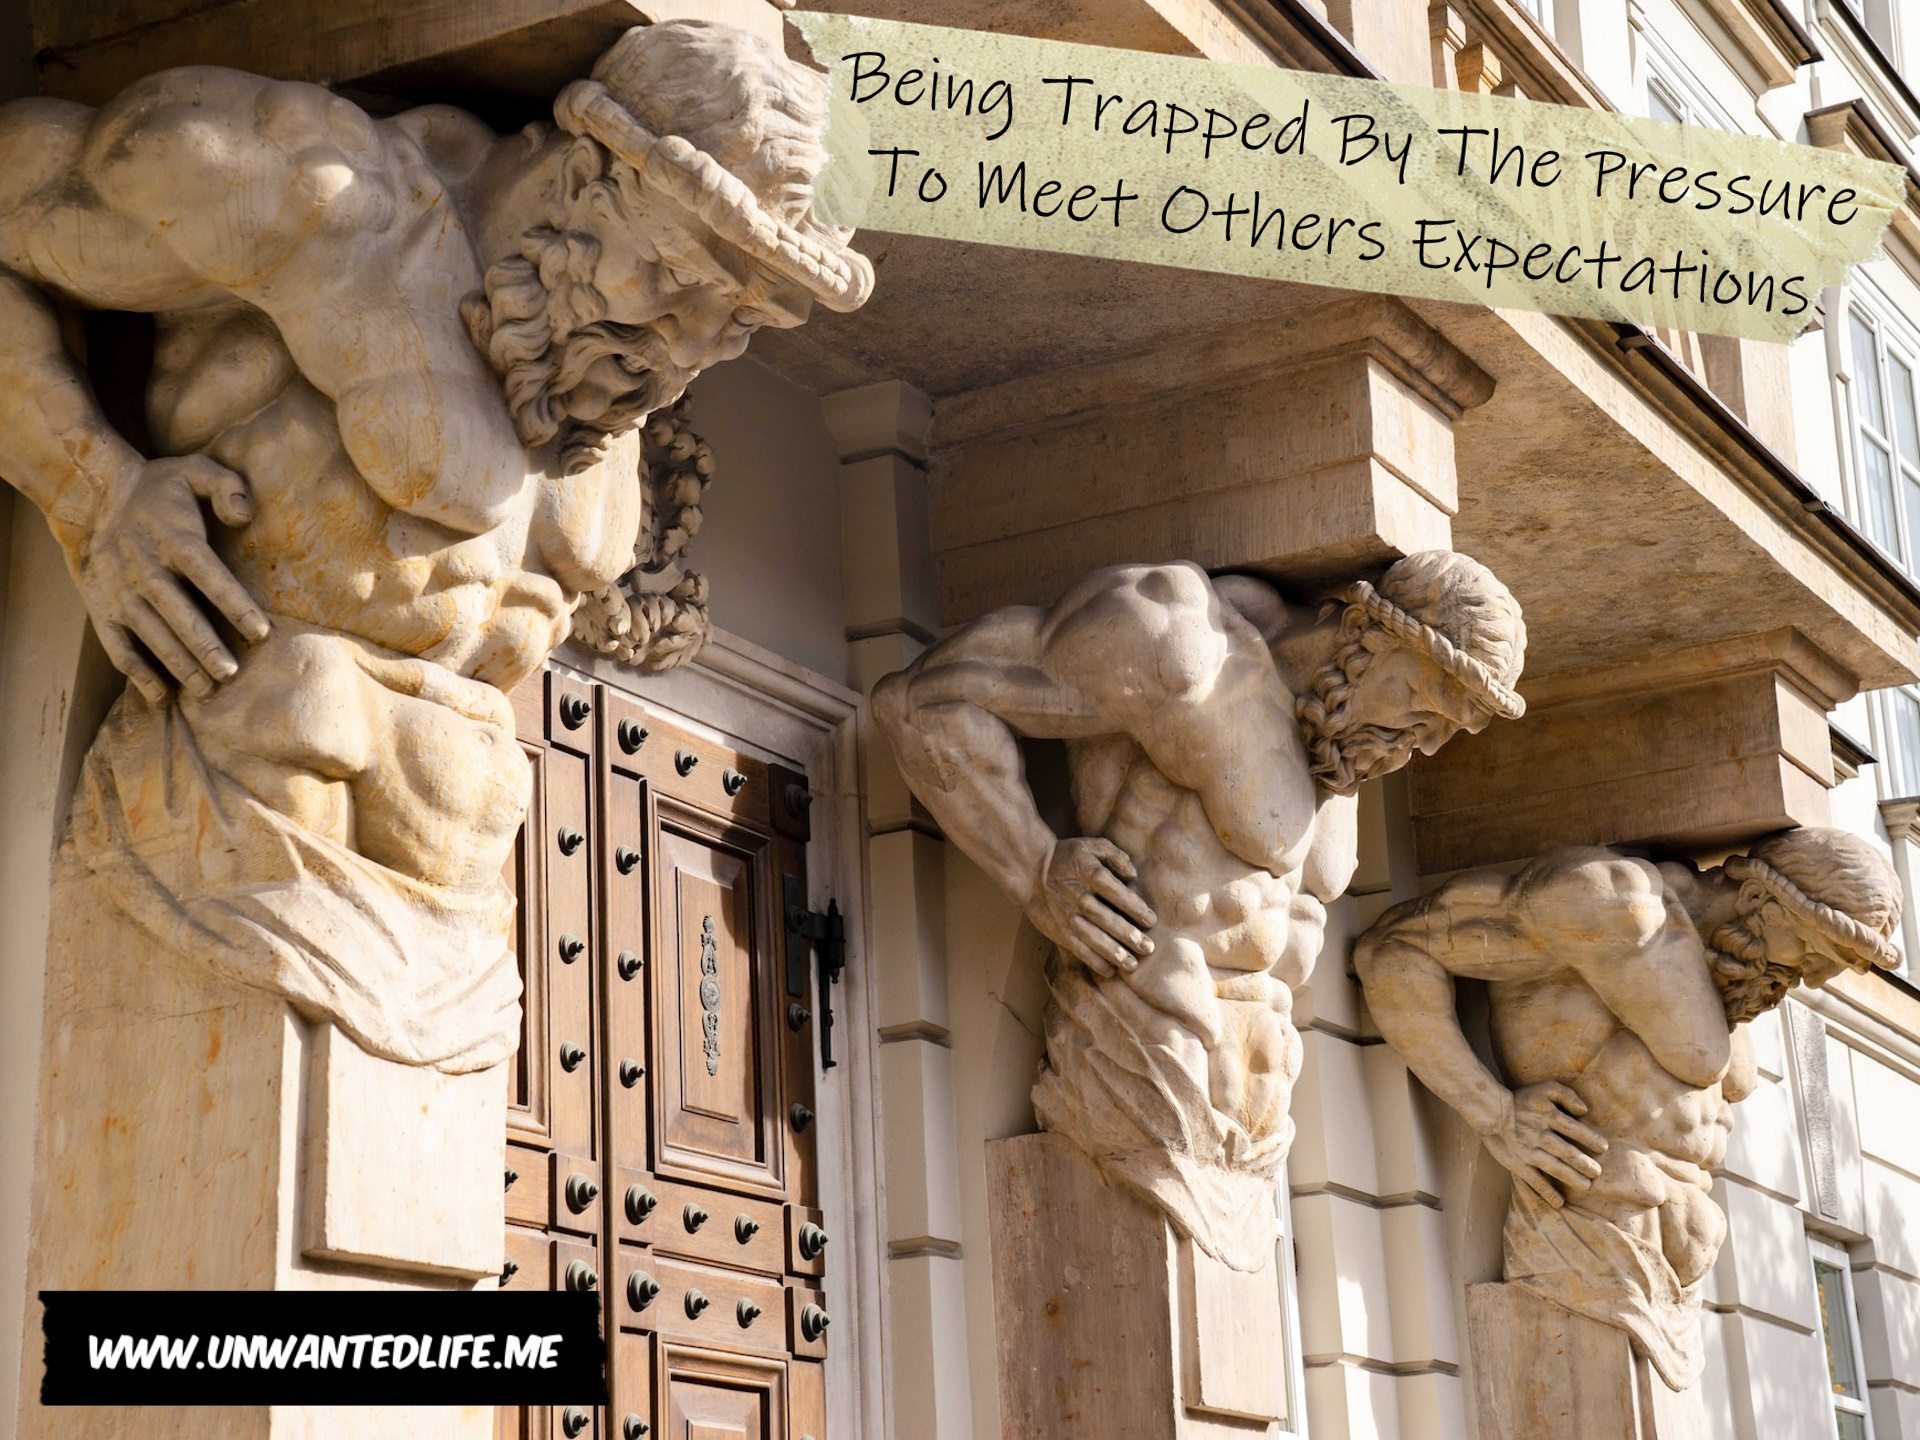 A photo of an architectural design that shows three muscular stone carvings of men holding up a balcony to represent the topic of the article - Being Trapped By The Pressure To Meet Others Expectations